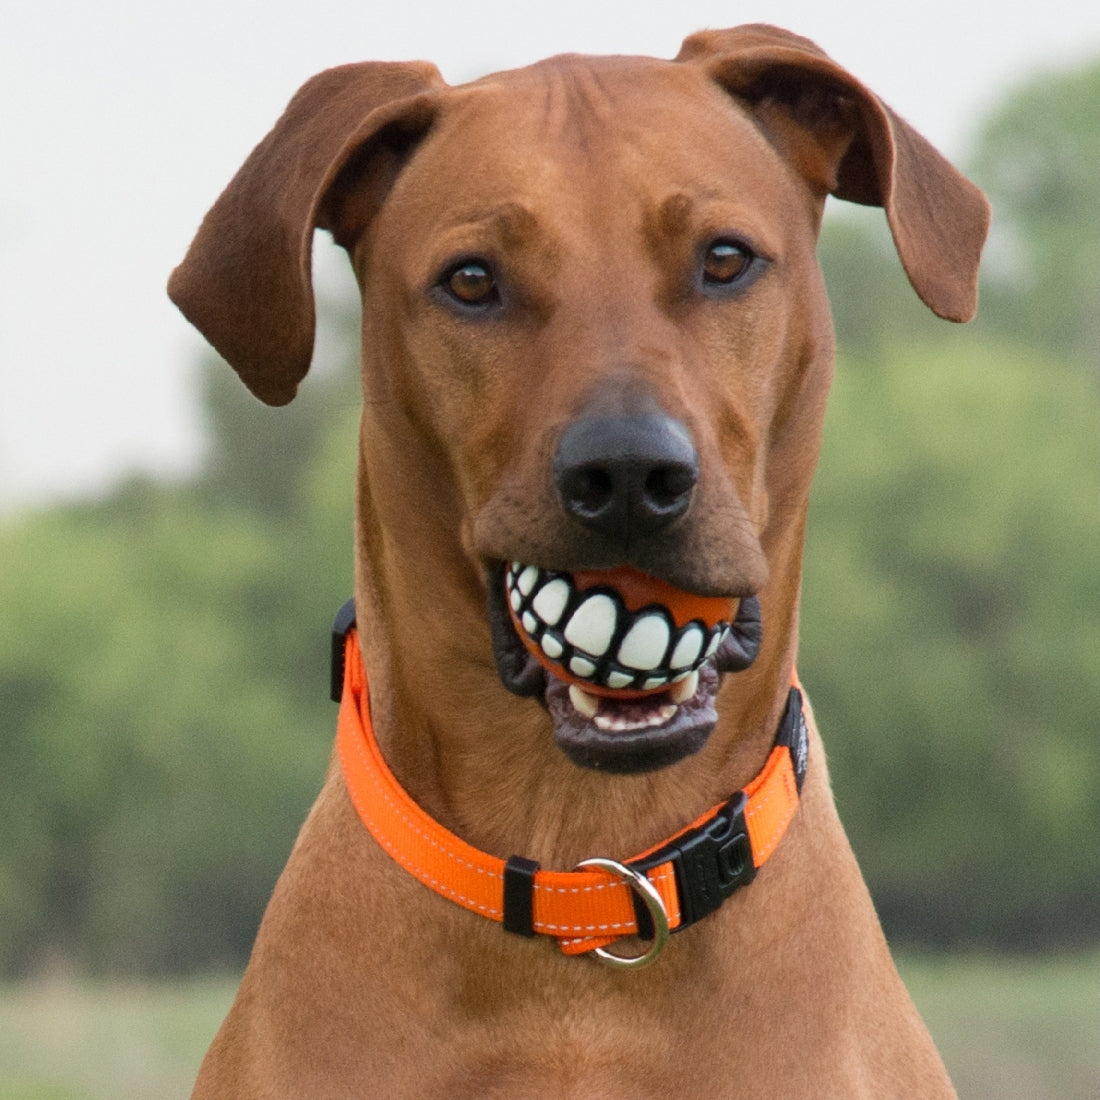 Dog wearing a Rogz orange collar and a ball-grinning toy.